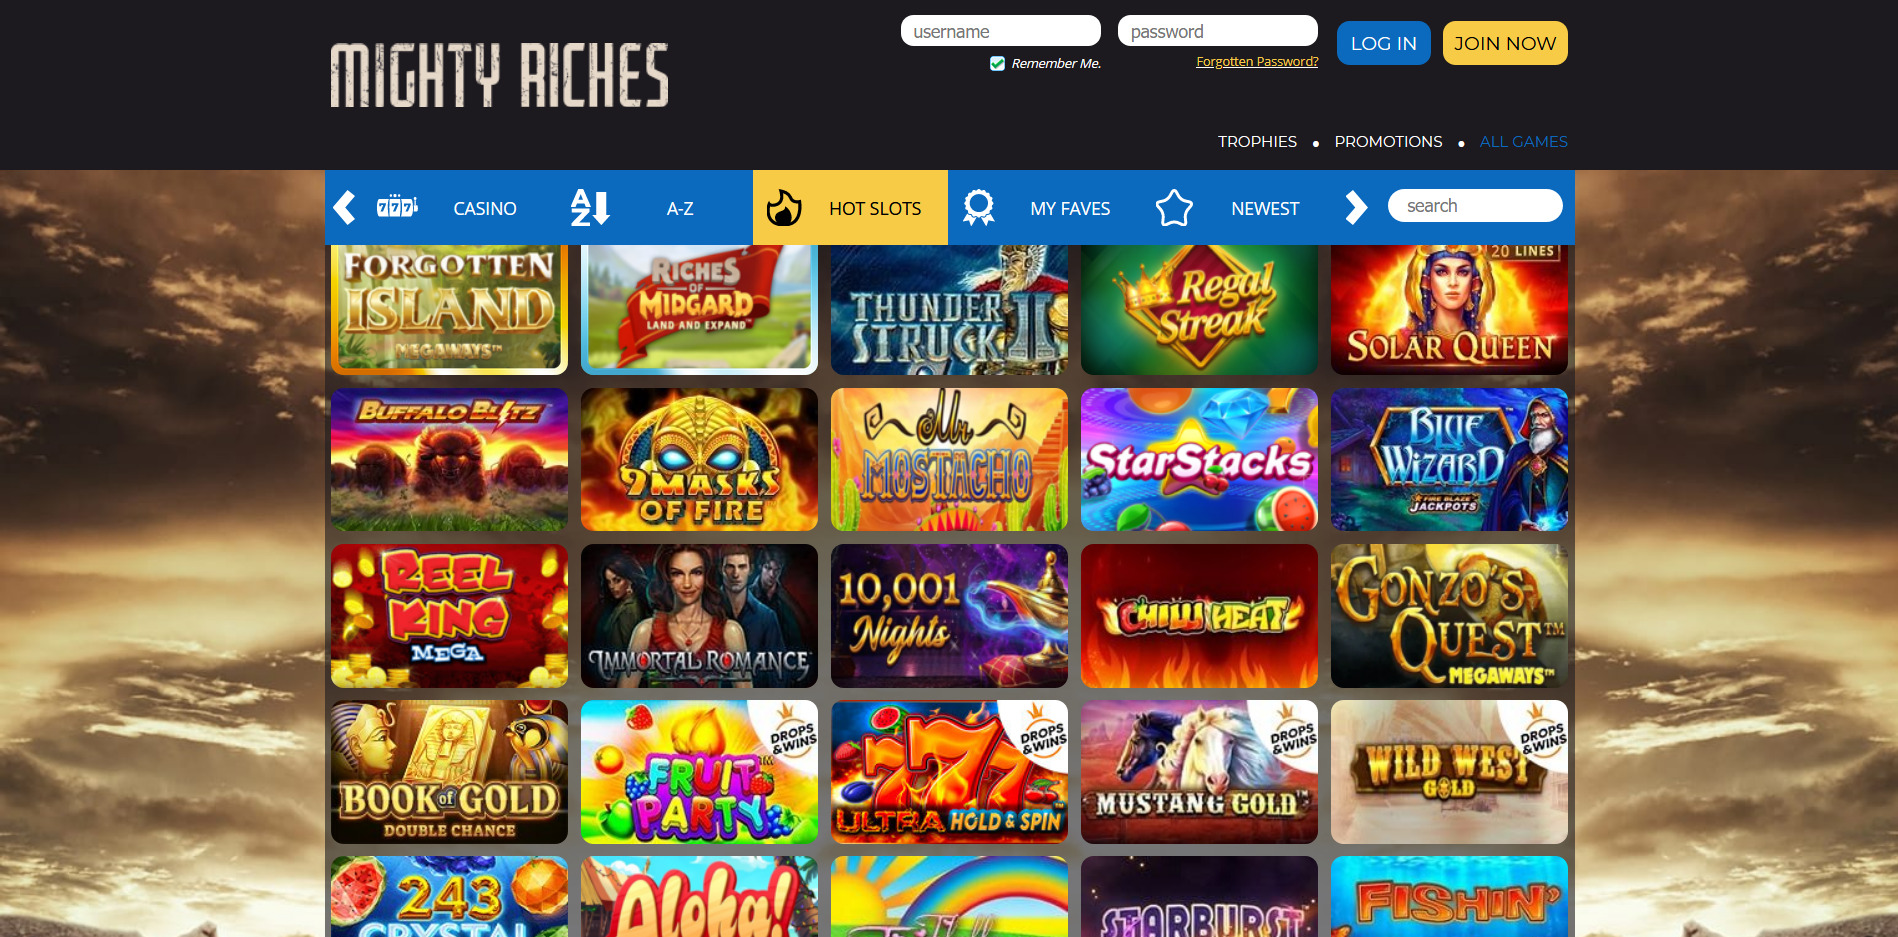 Mighty Riches Casino Games